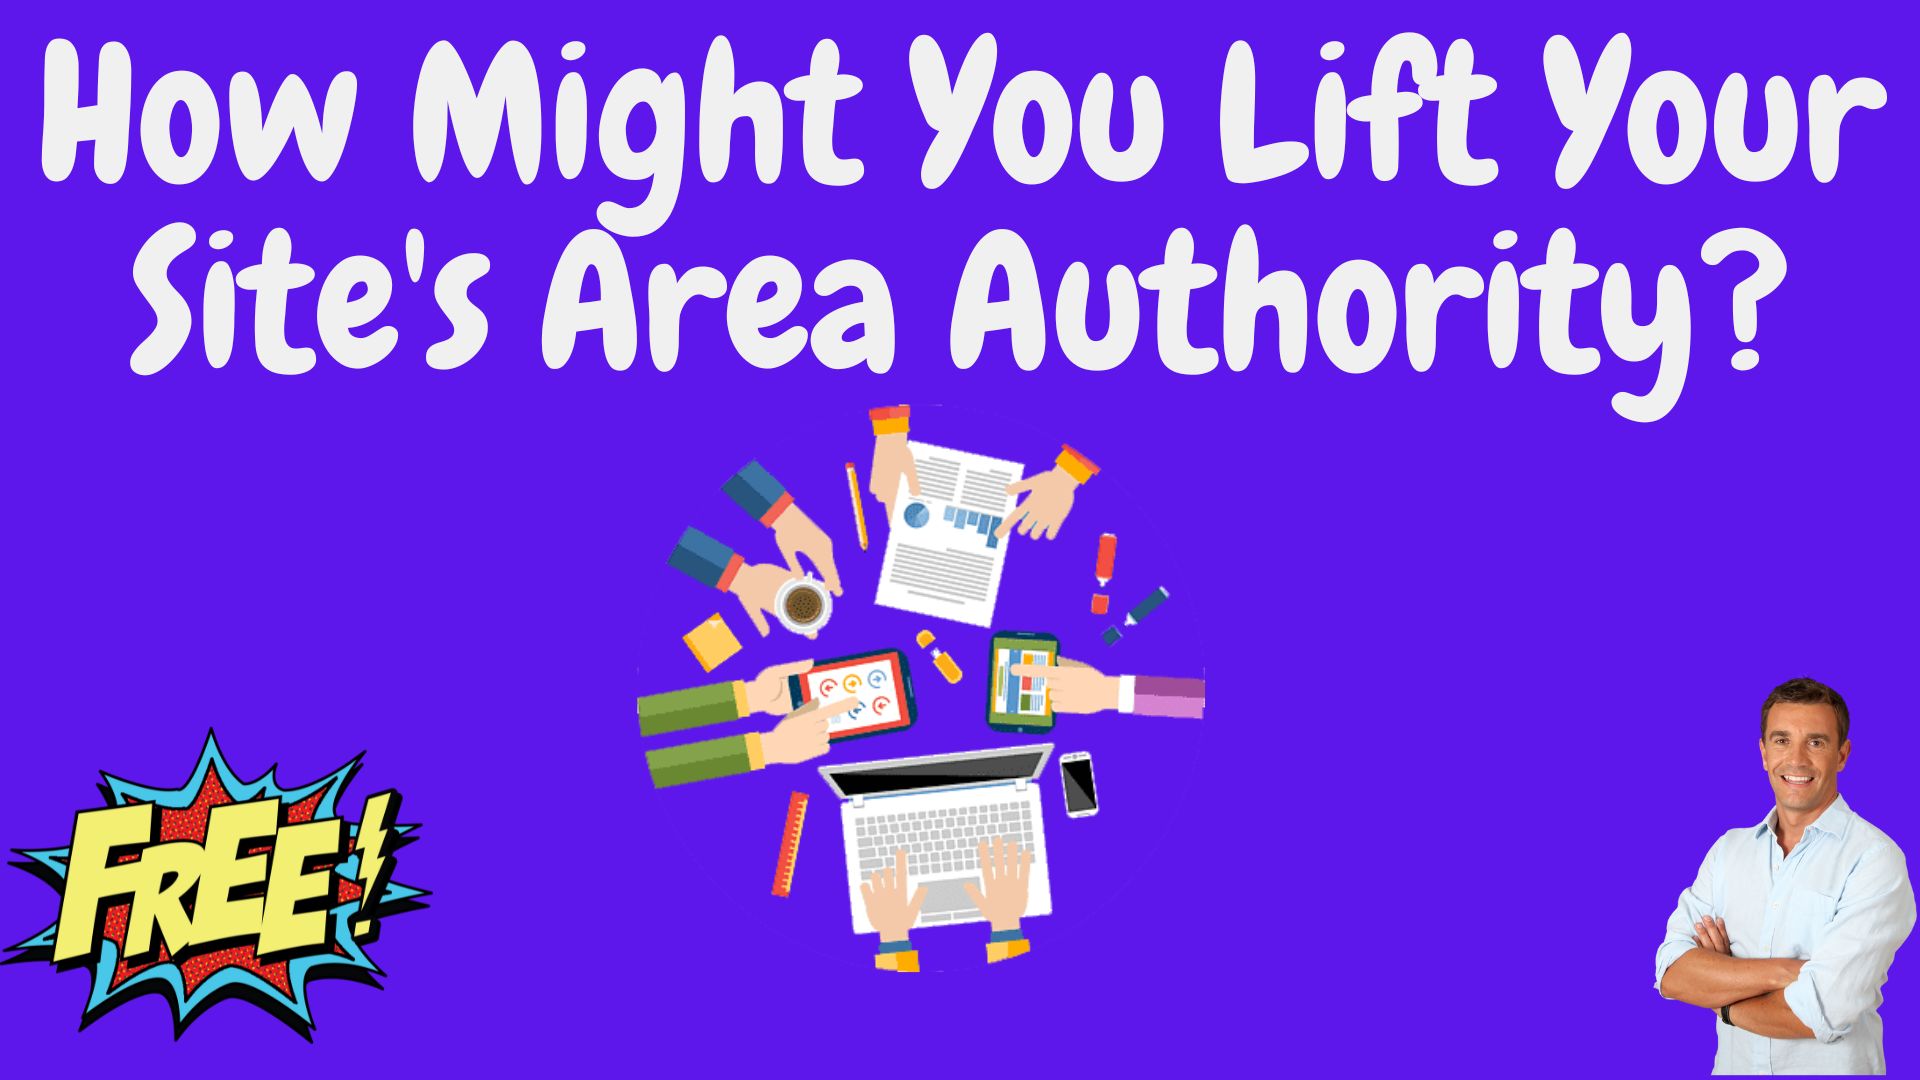 How might you lift your site's area authority?